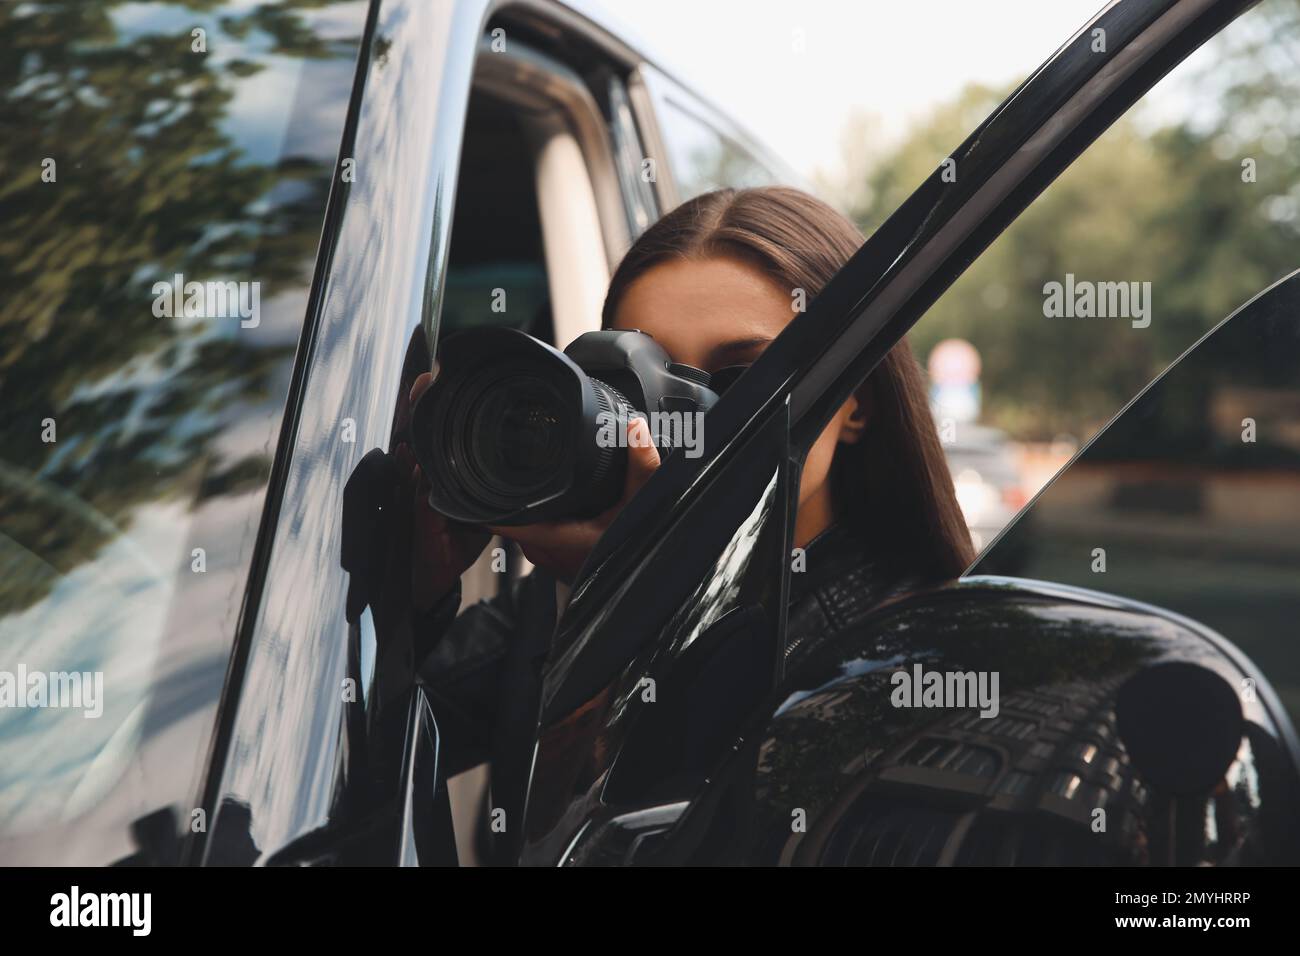 Private detective with camera spying near car outdoors Stock Photo